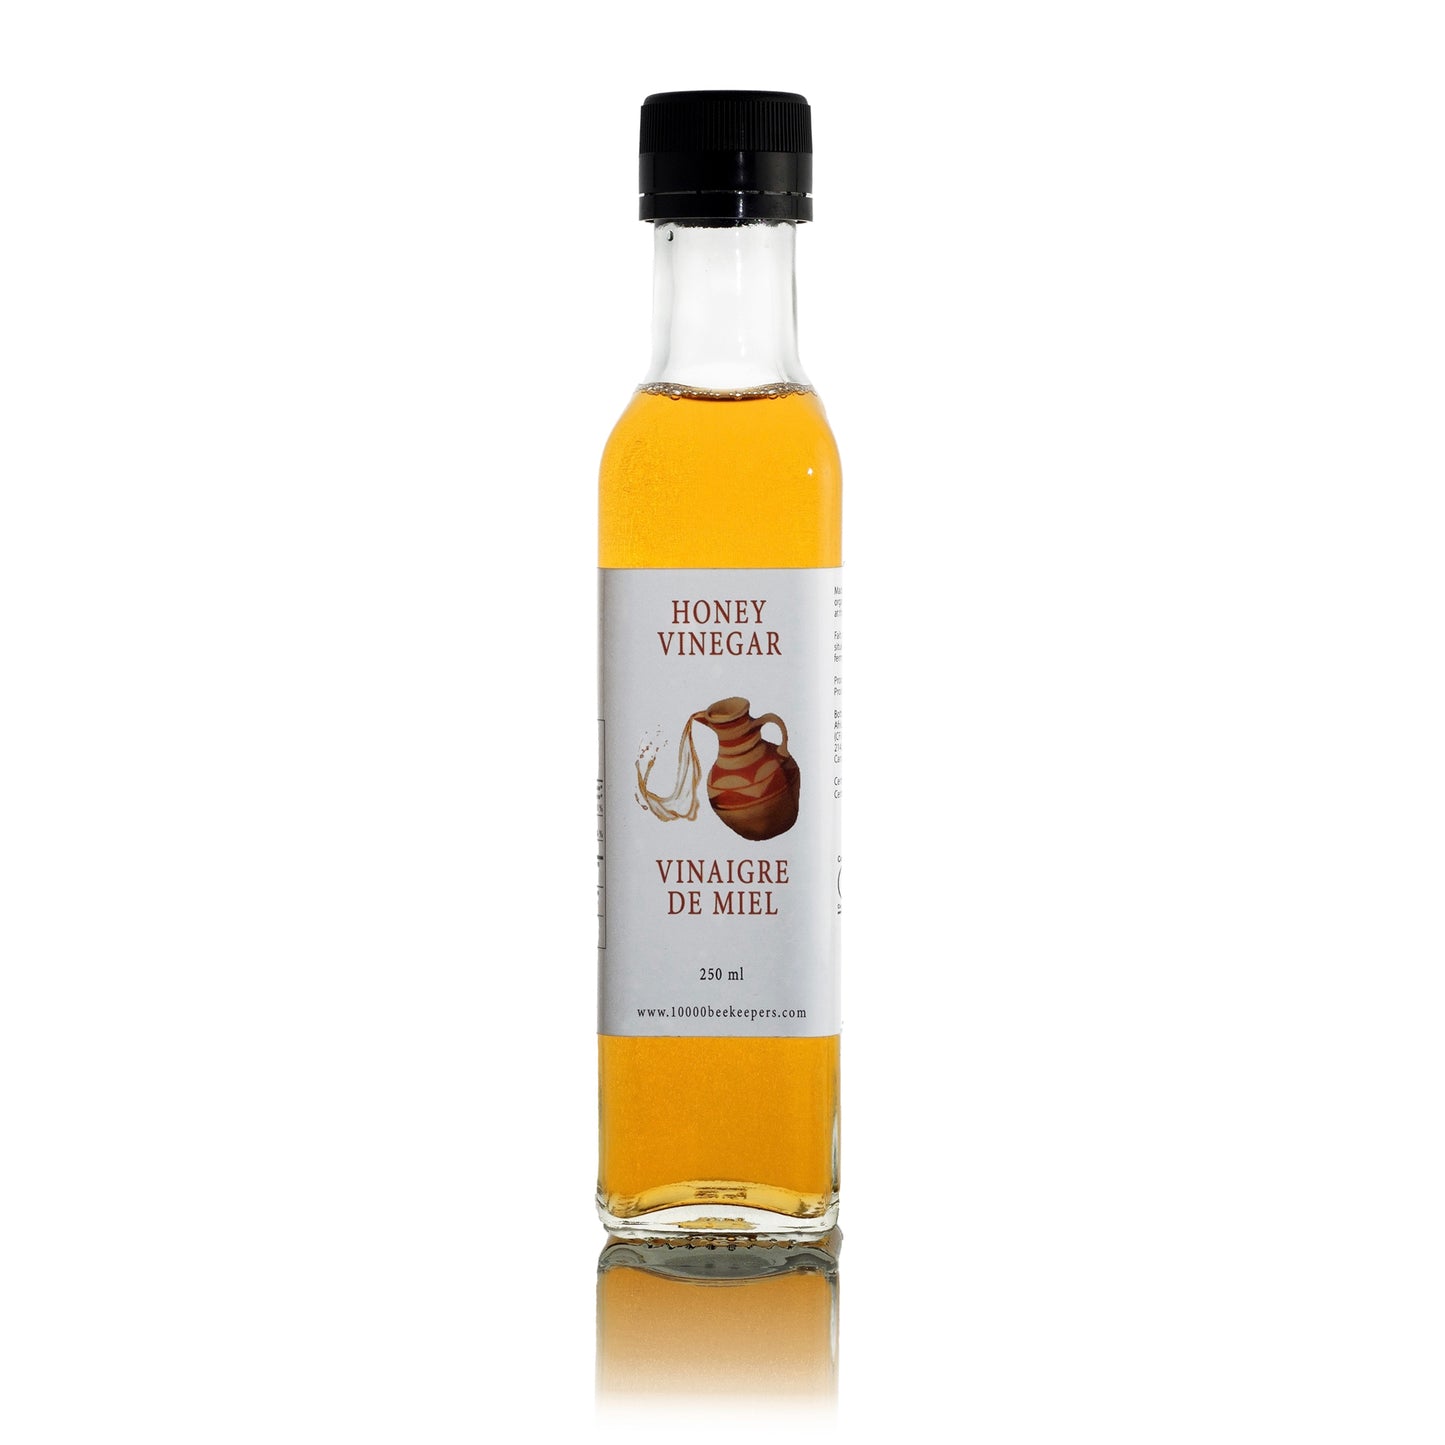 Naturally Fermented Vinegar made with healthy organic honey